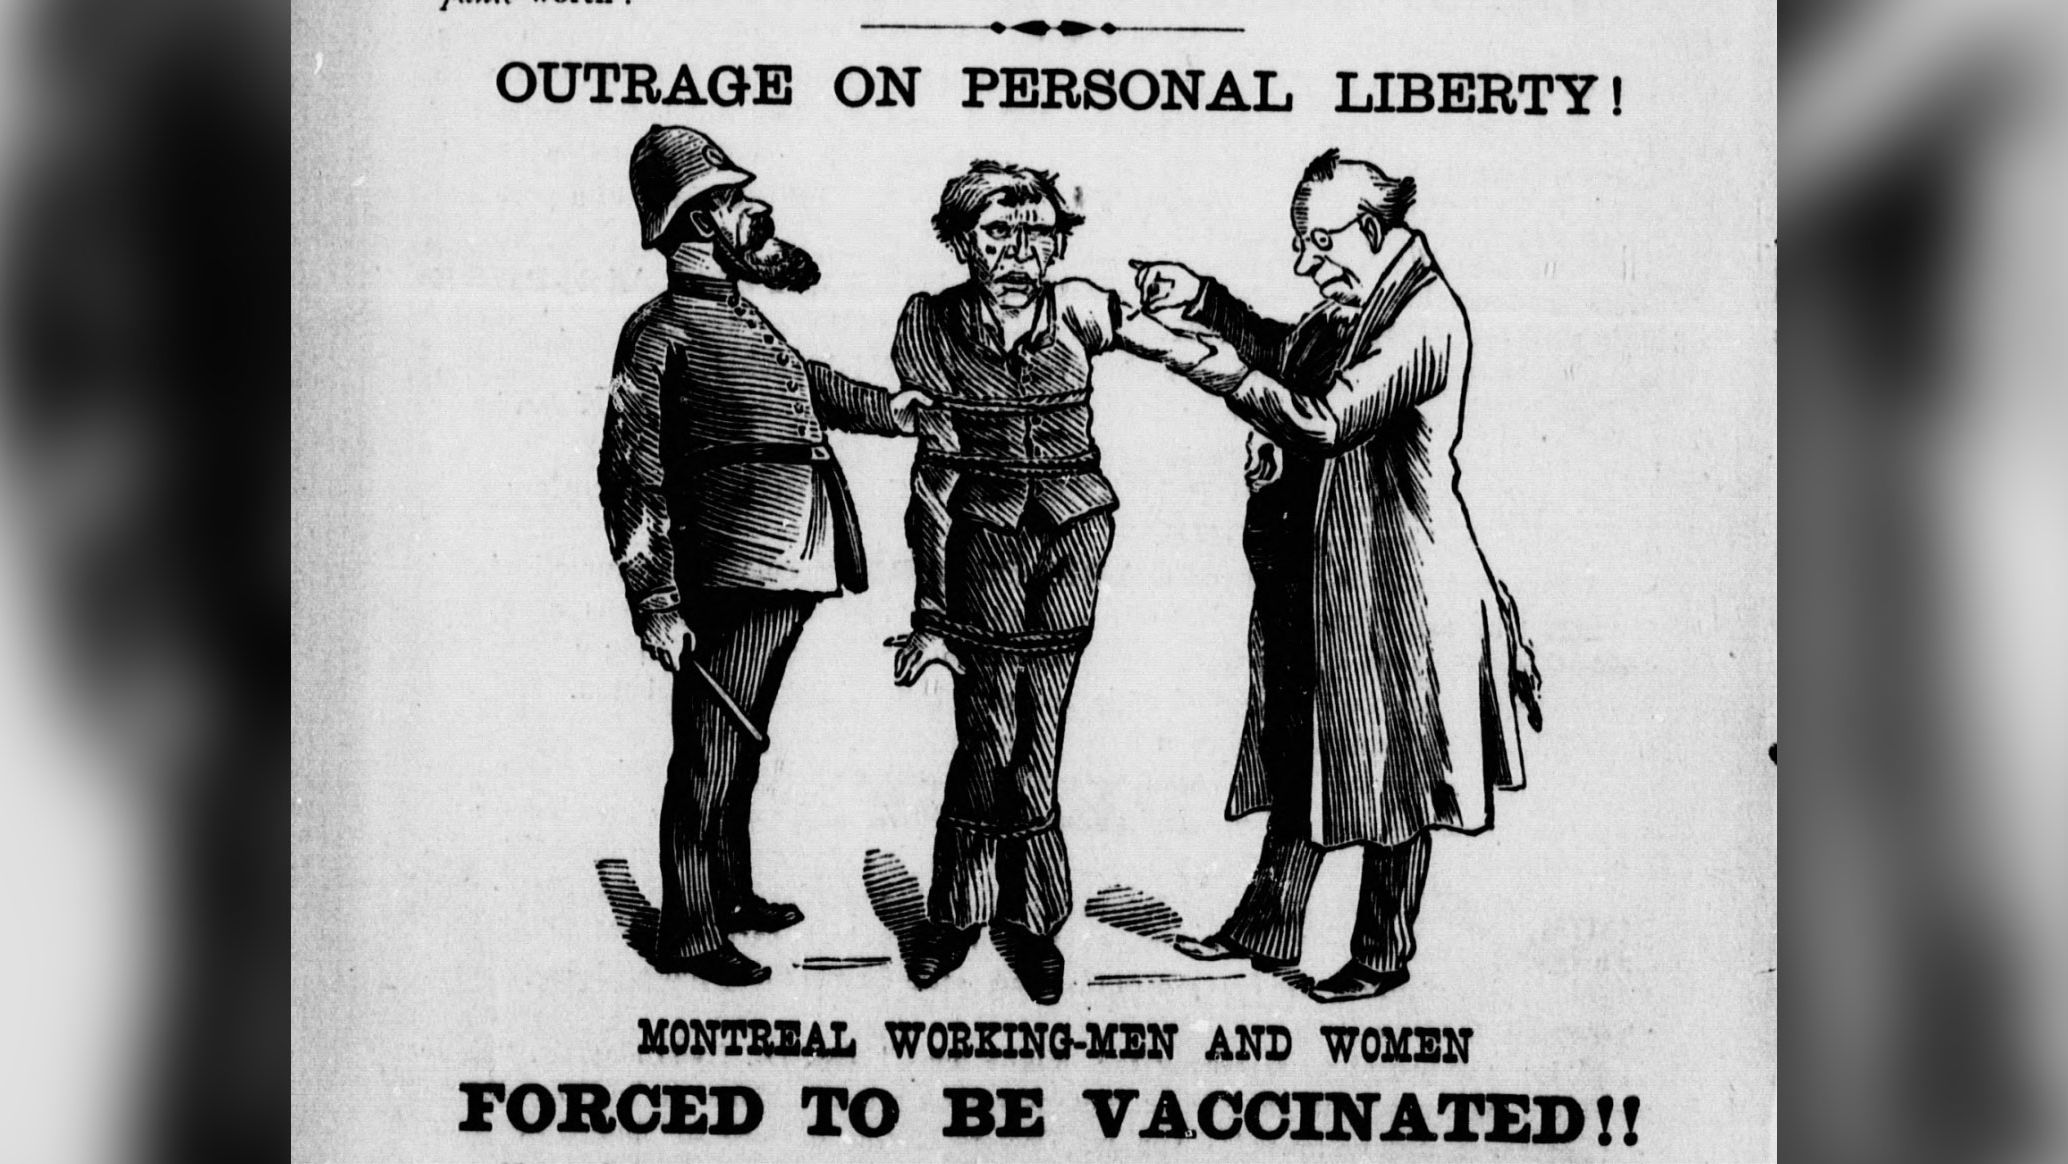 This cartoon depicts a working-class man being forcibly vaccinated by a health official, while held by a policeman.